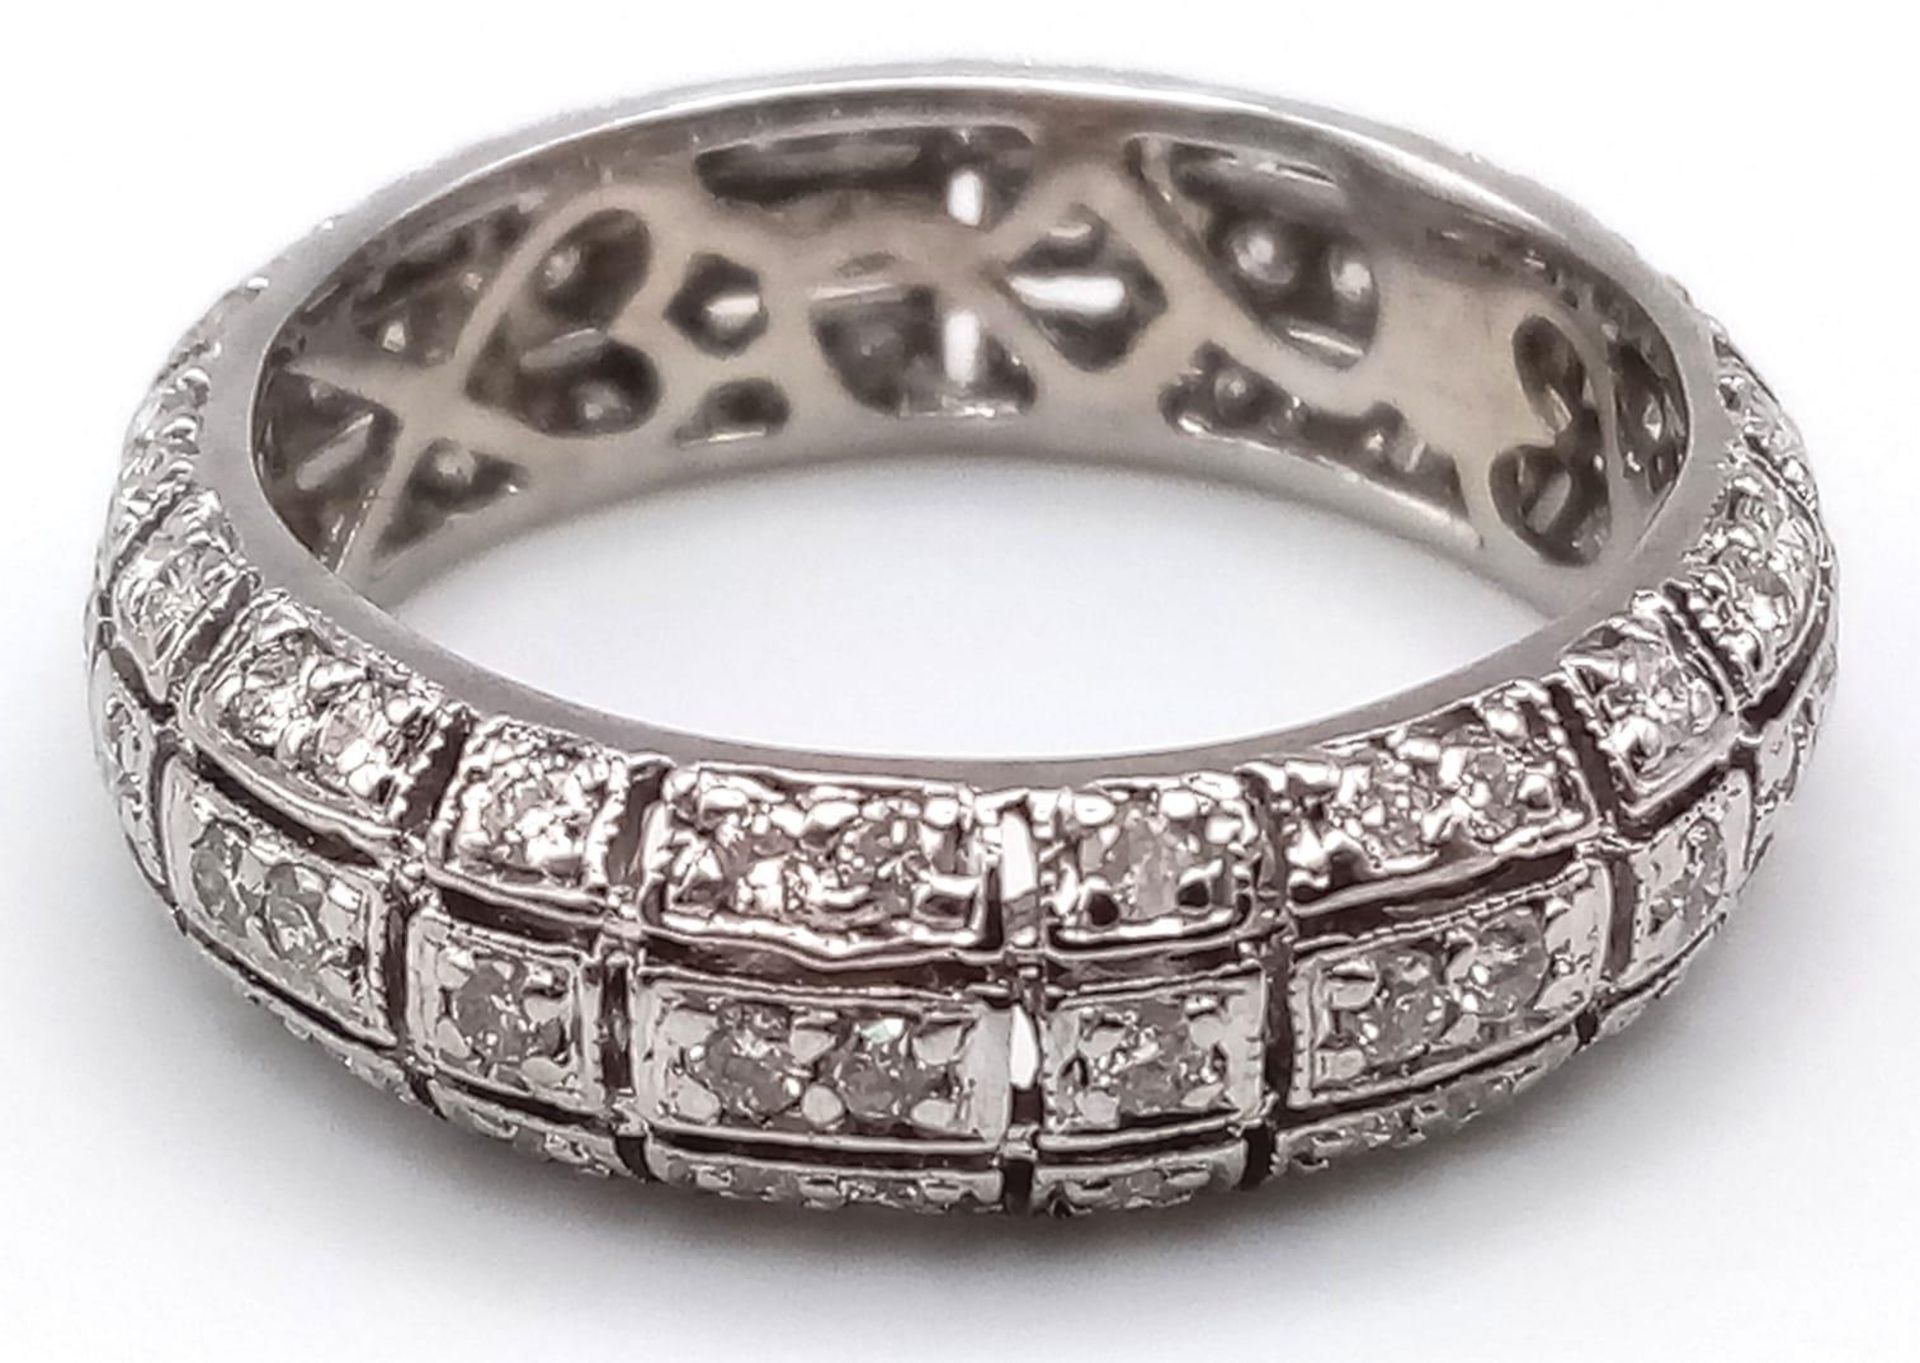 18K WHITE GOLD DIAMOND BAND RING. APPROX 1.30CT DIAMOND. TOTAL WEIGHT 4G. SIZE N - Image 4 of 4